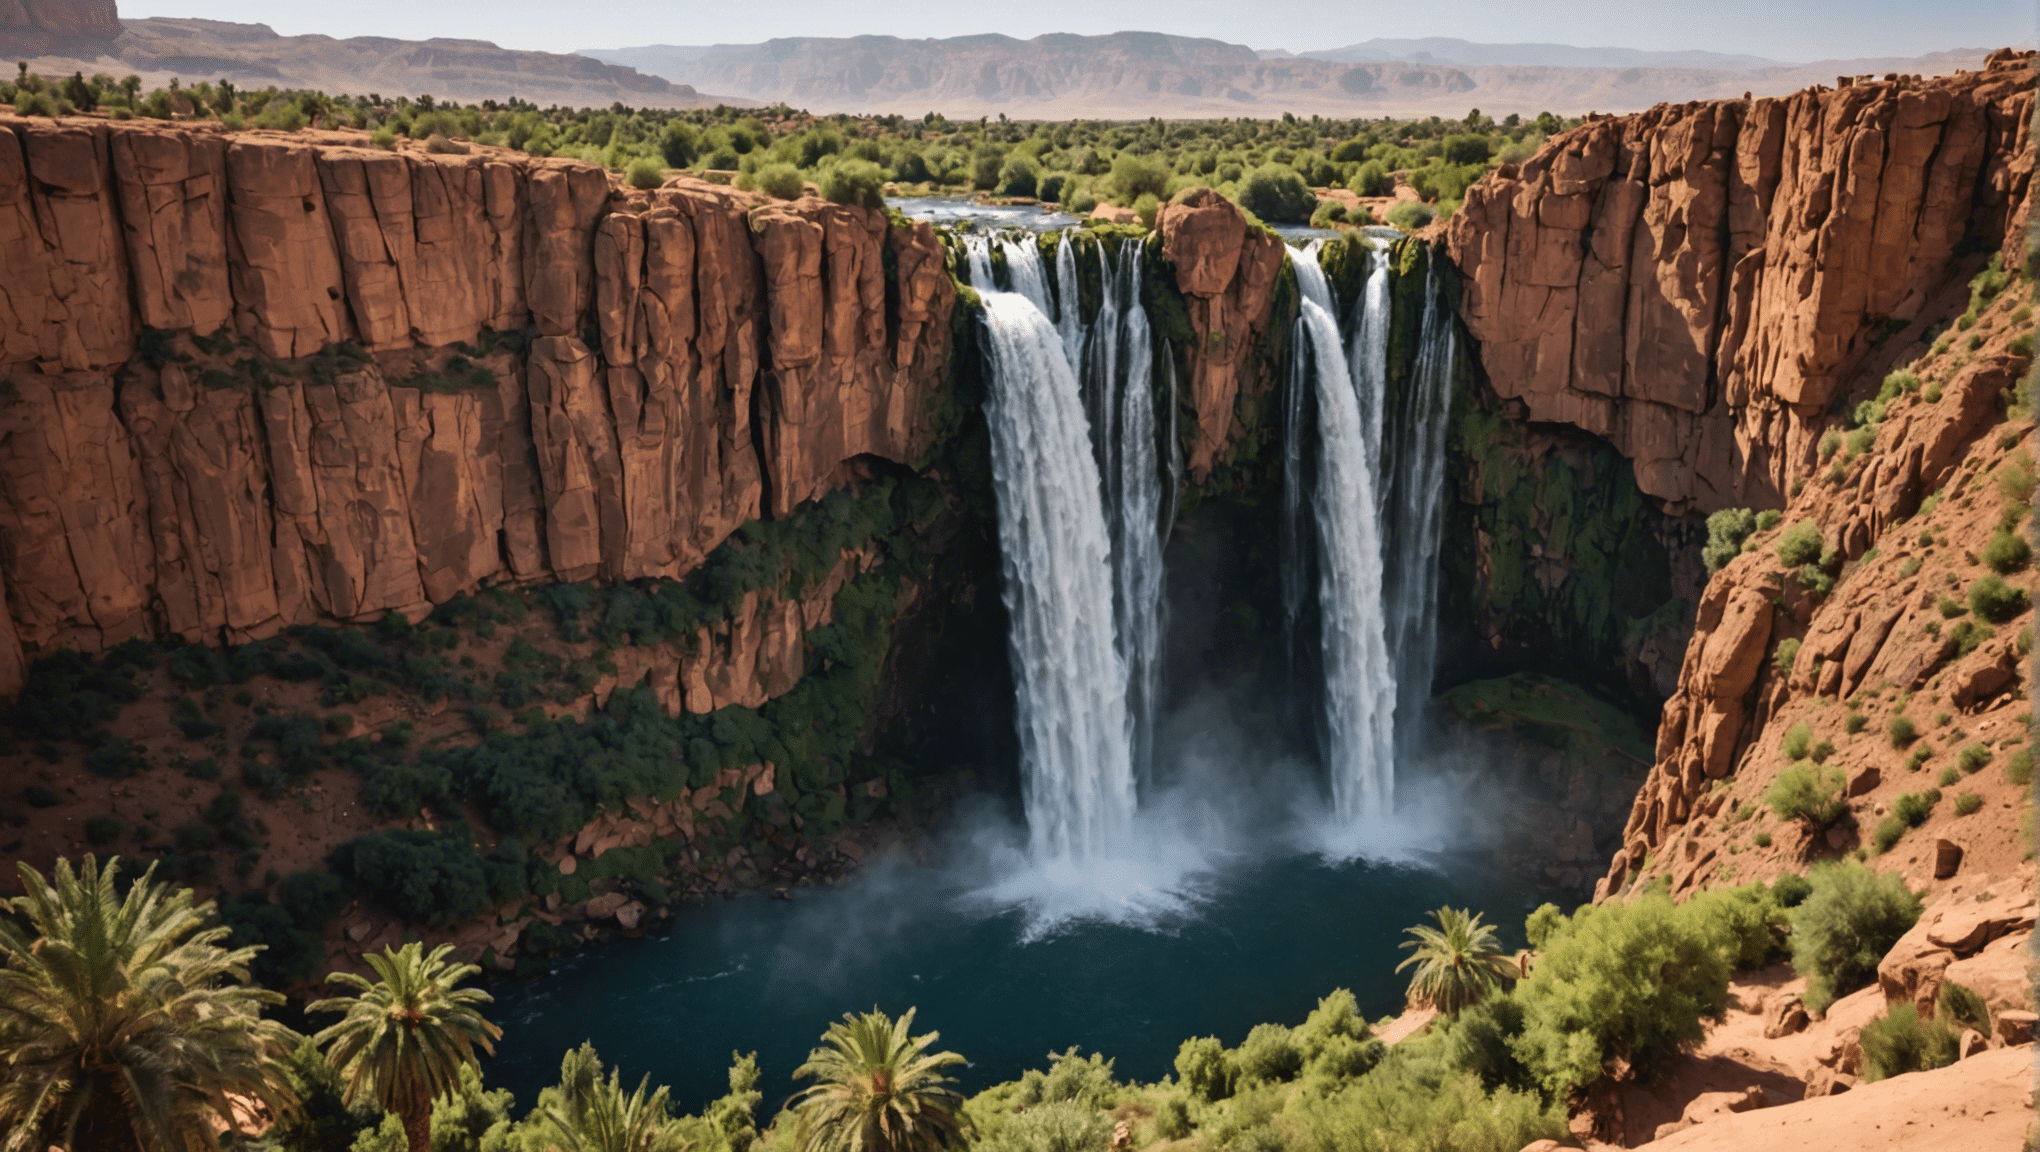 discover the distance between ouzoud waterfalls and marrakech and plan your adventure with ease. learn about the natural wonder and how to get there in this comprehensive guide.